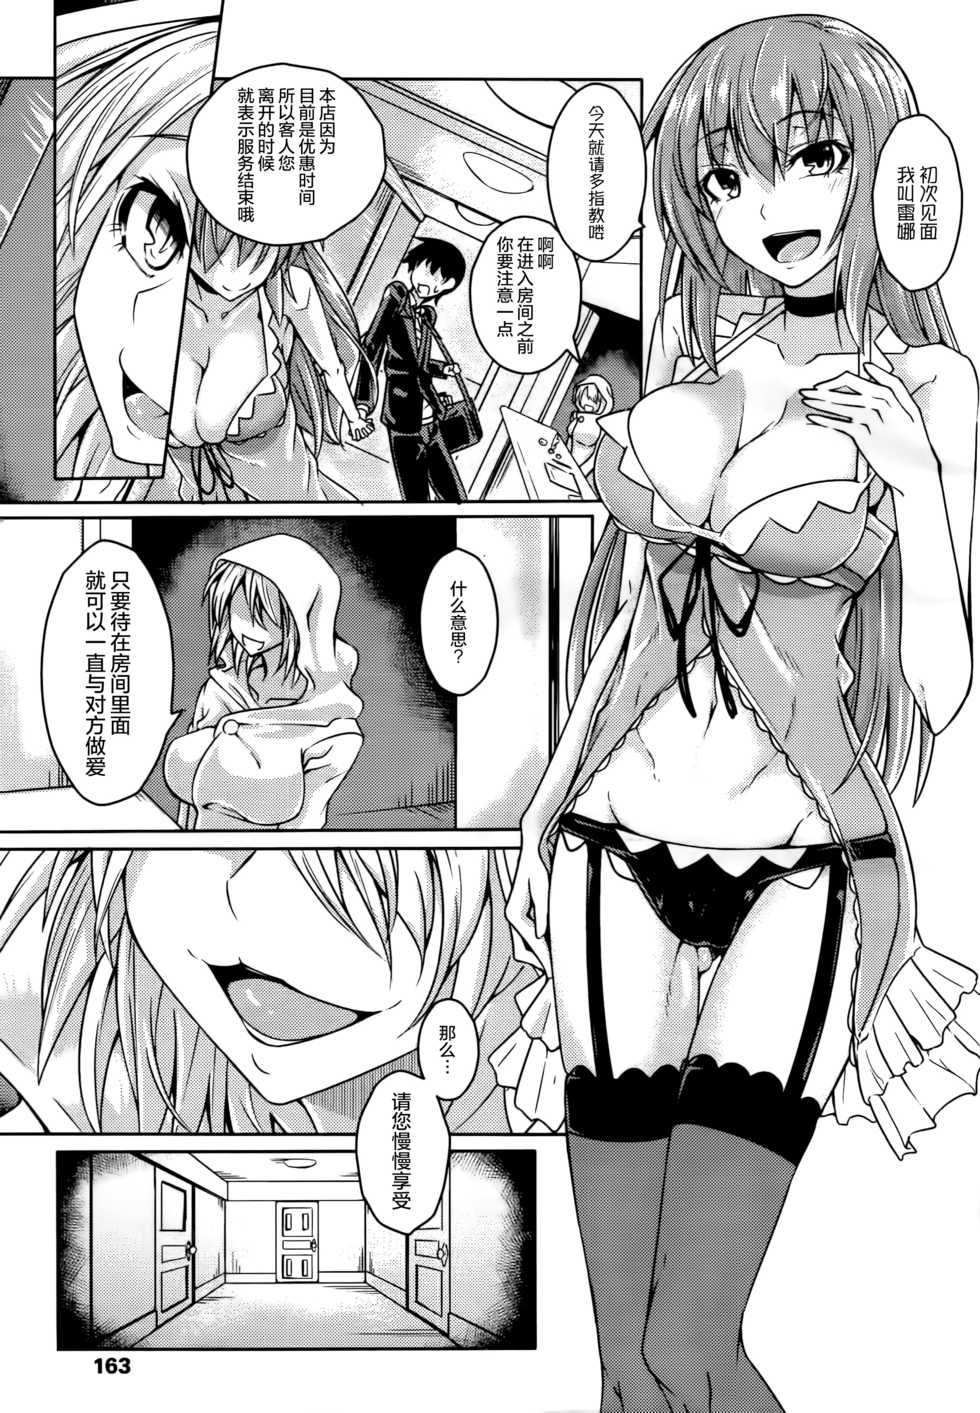 [Stealth Changing Line] Club Succubus (Girls forM Vol. 14) [Chinese] [无毒汉化组] - Page 3